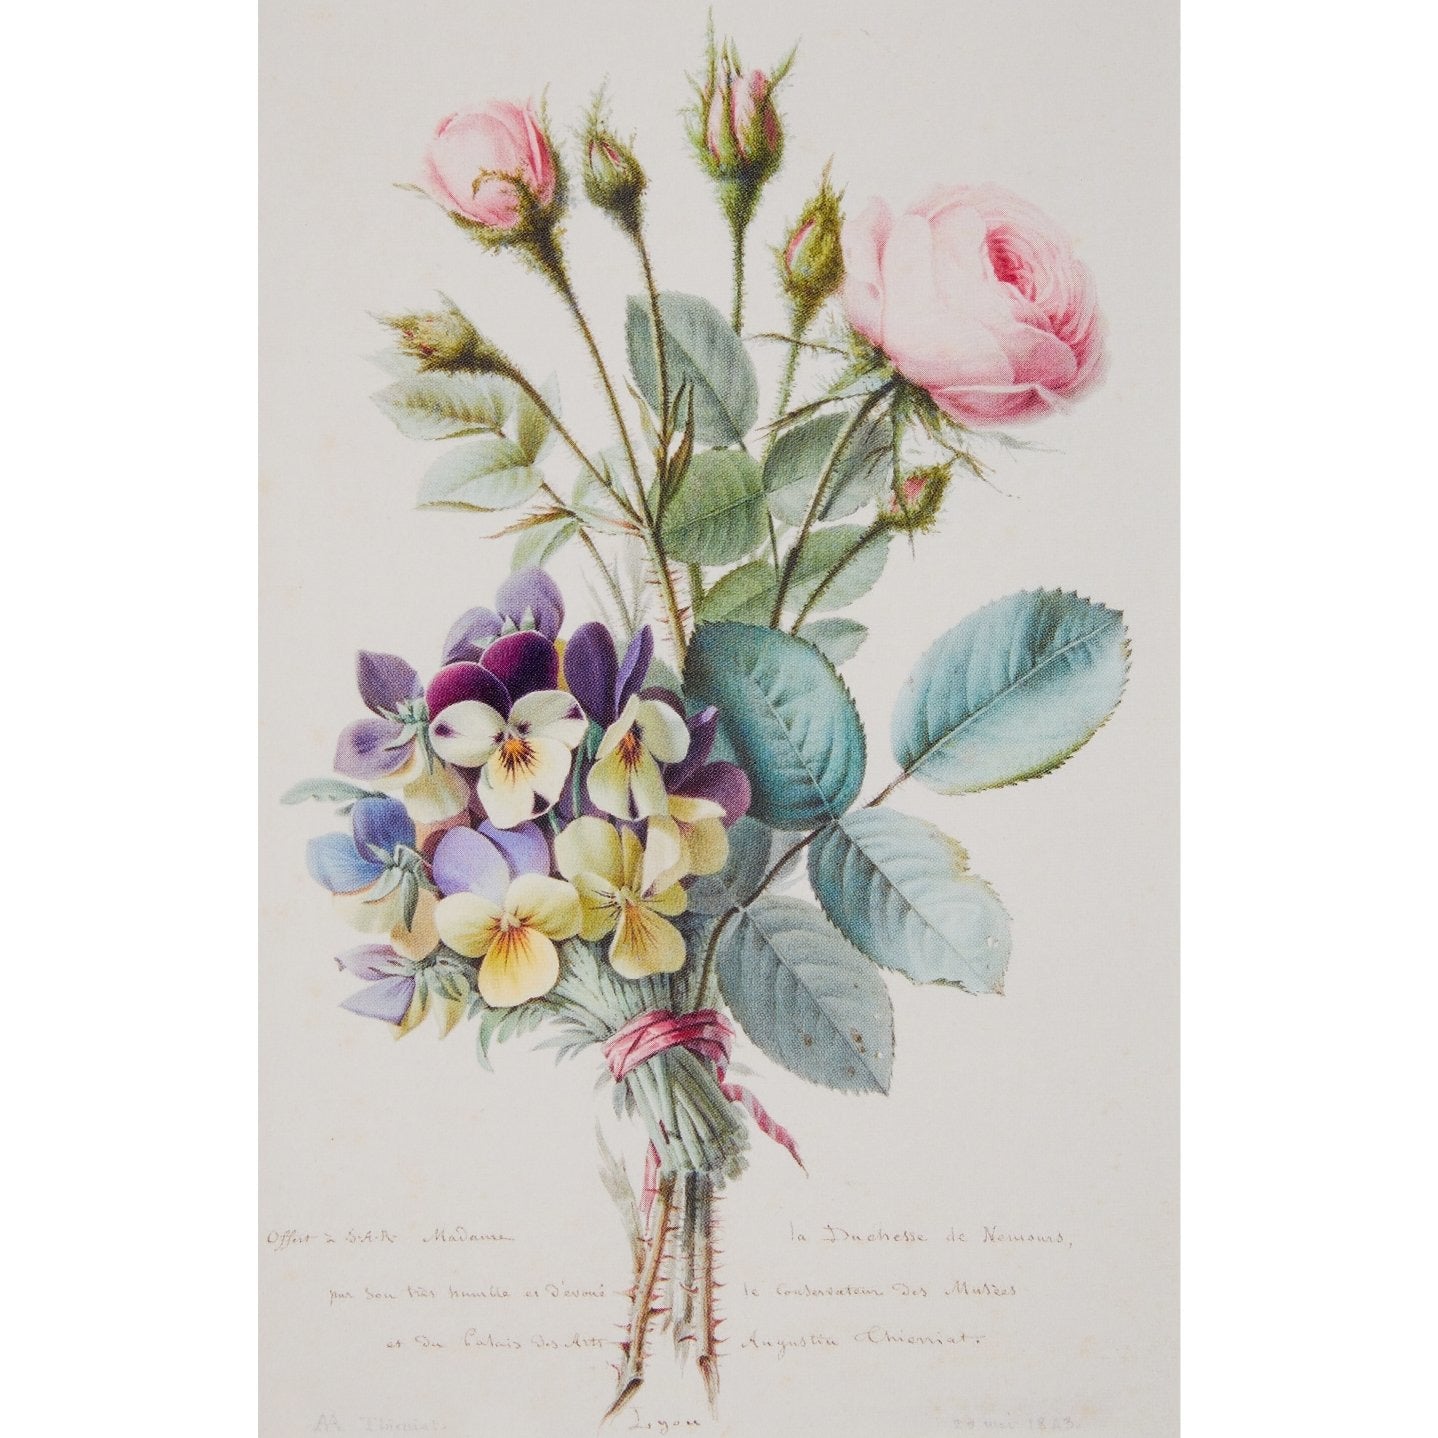 Notecard - Pansies and Moss Roses by Augustin Thierriat. From the Broughton Collection of the Fitzwilliam Museum, brought to you by CuratingCambridge.co.uk